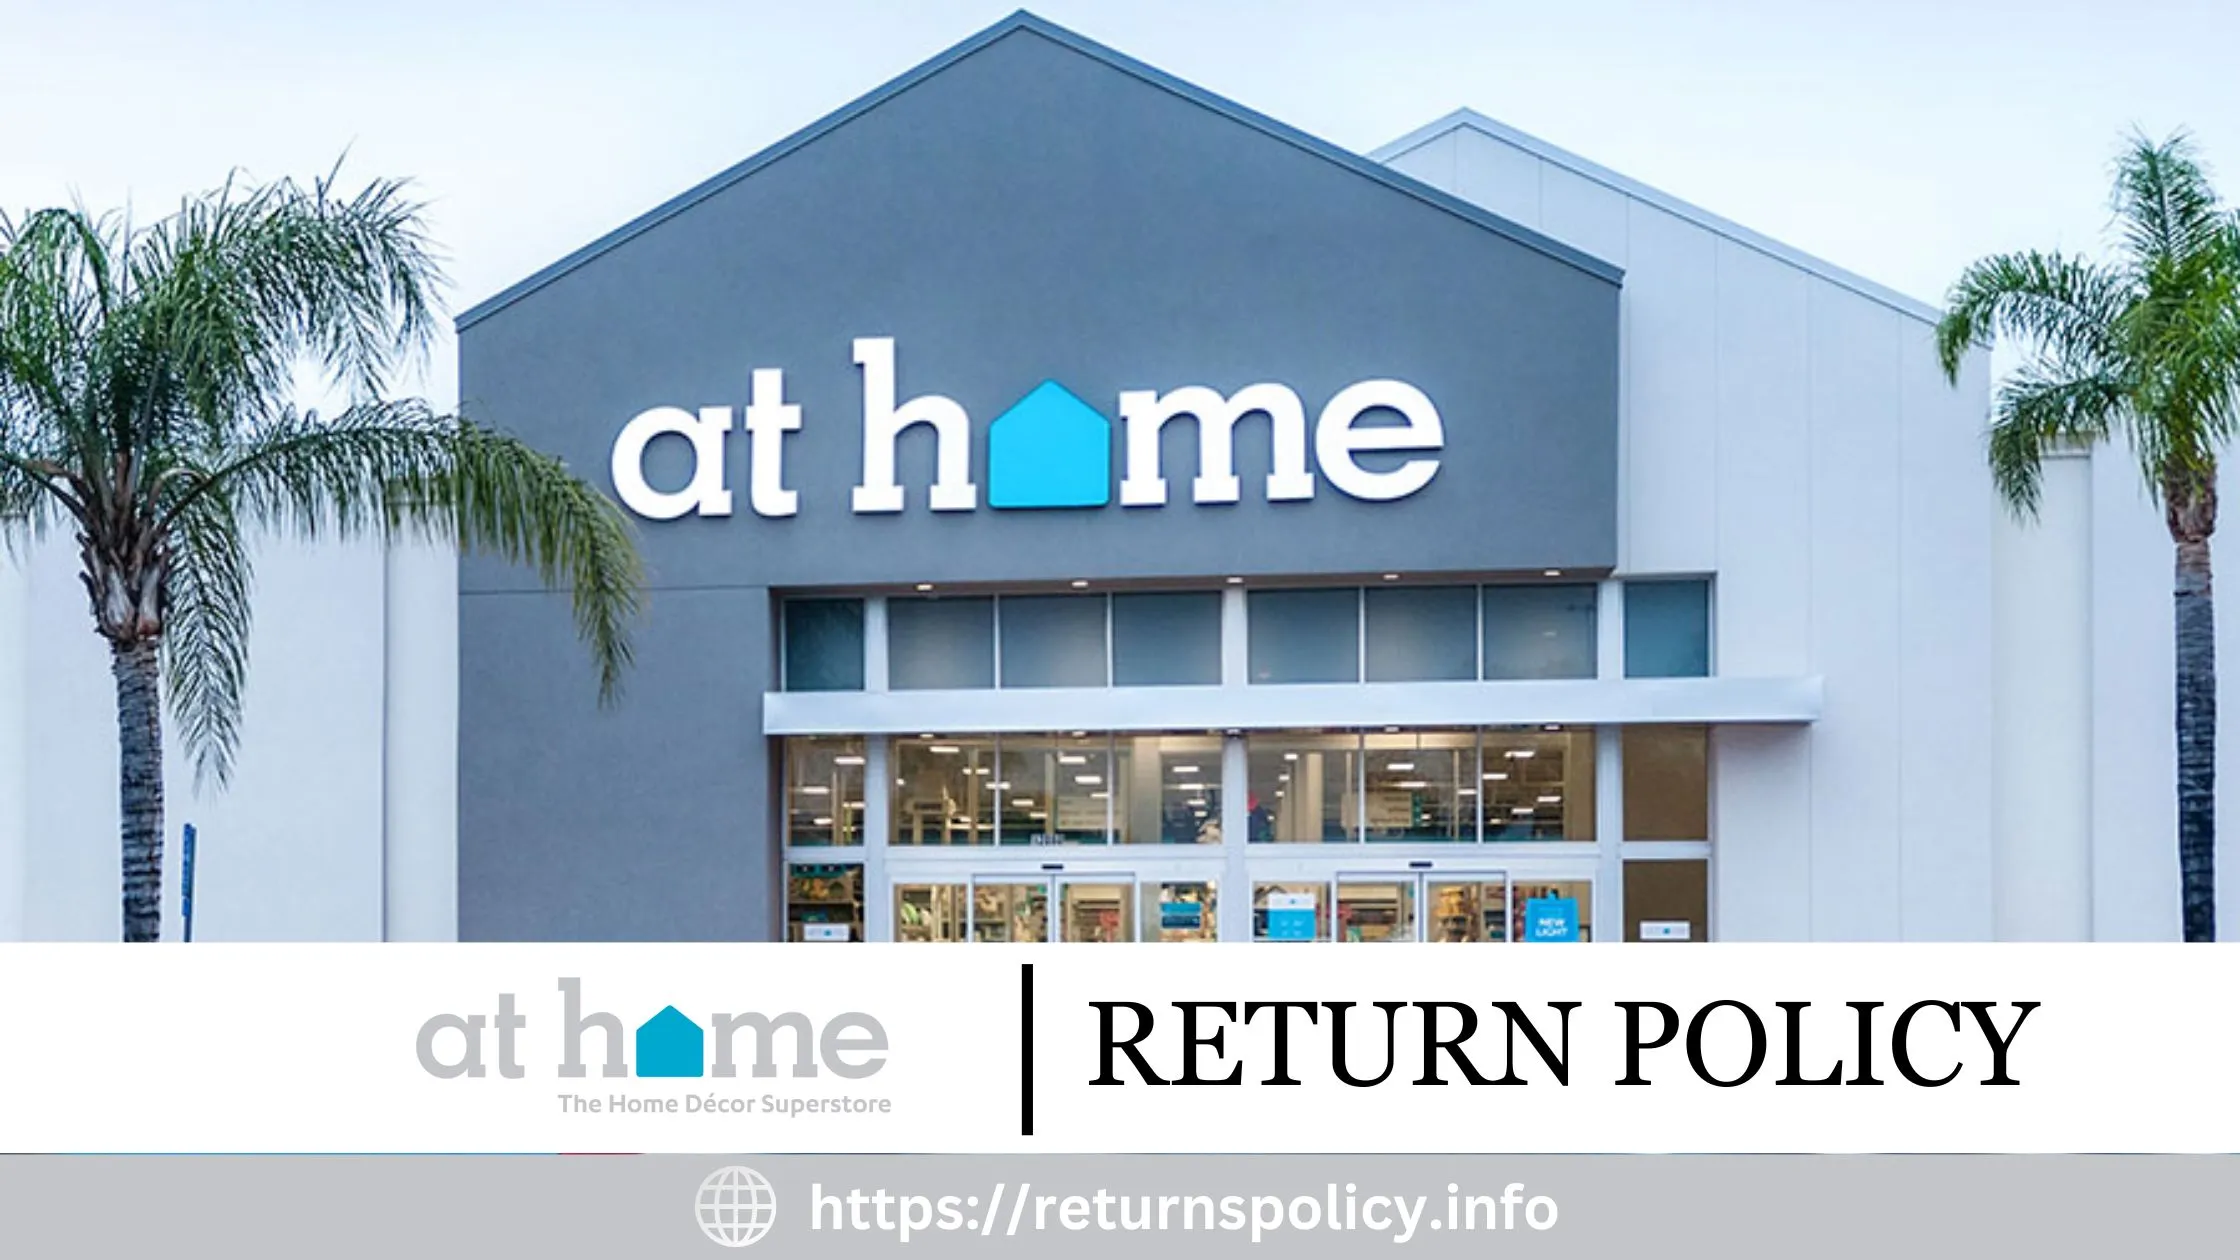 At Home Return Policy